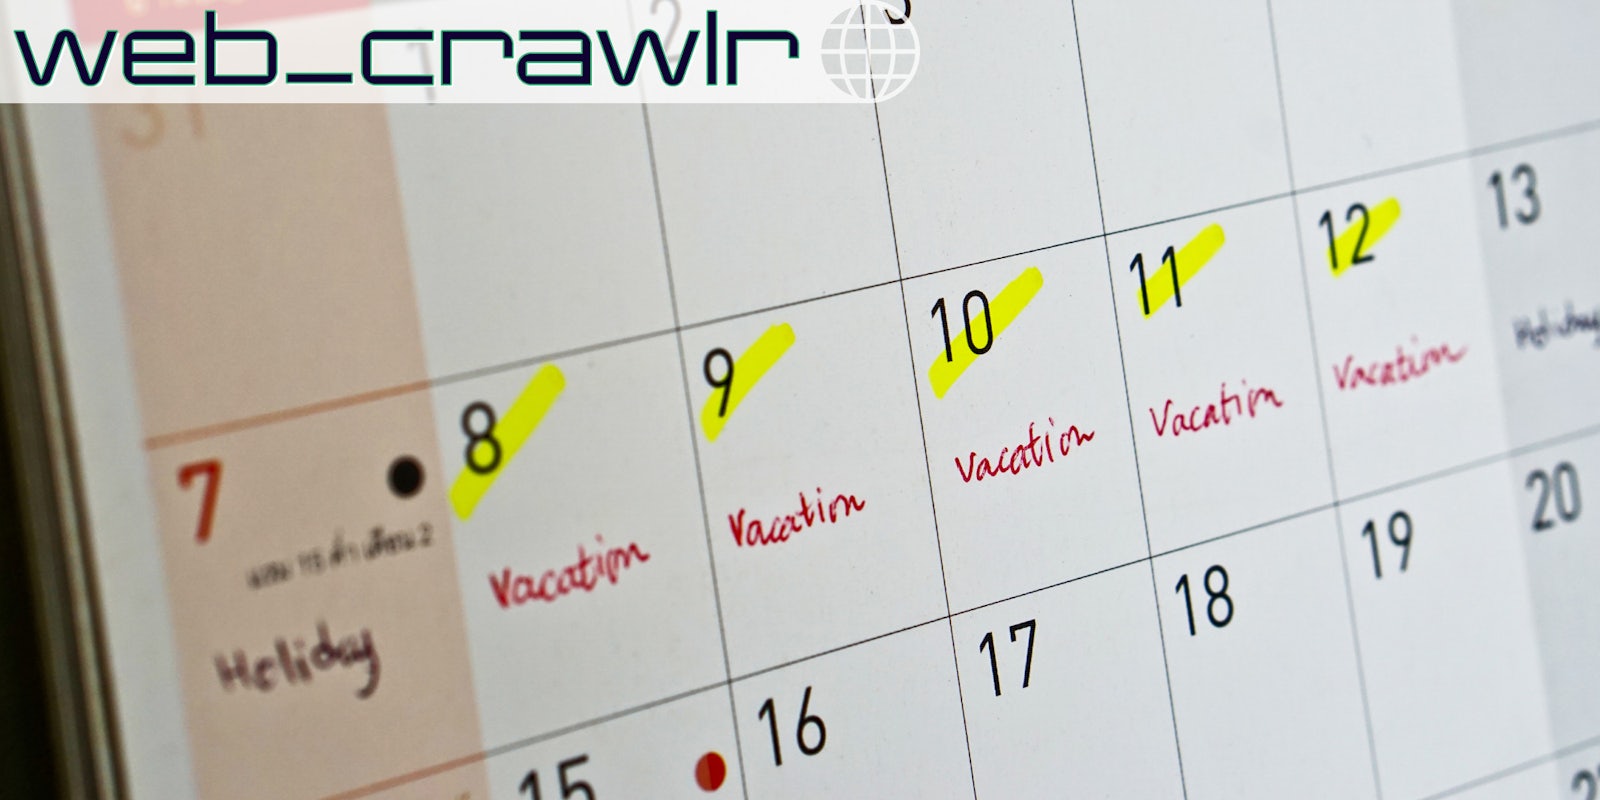 A calendar with days crossed off for 'vacation.' The Daily Dot newsletter web_crawlr logo is in the top left corner.